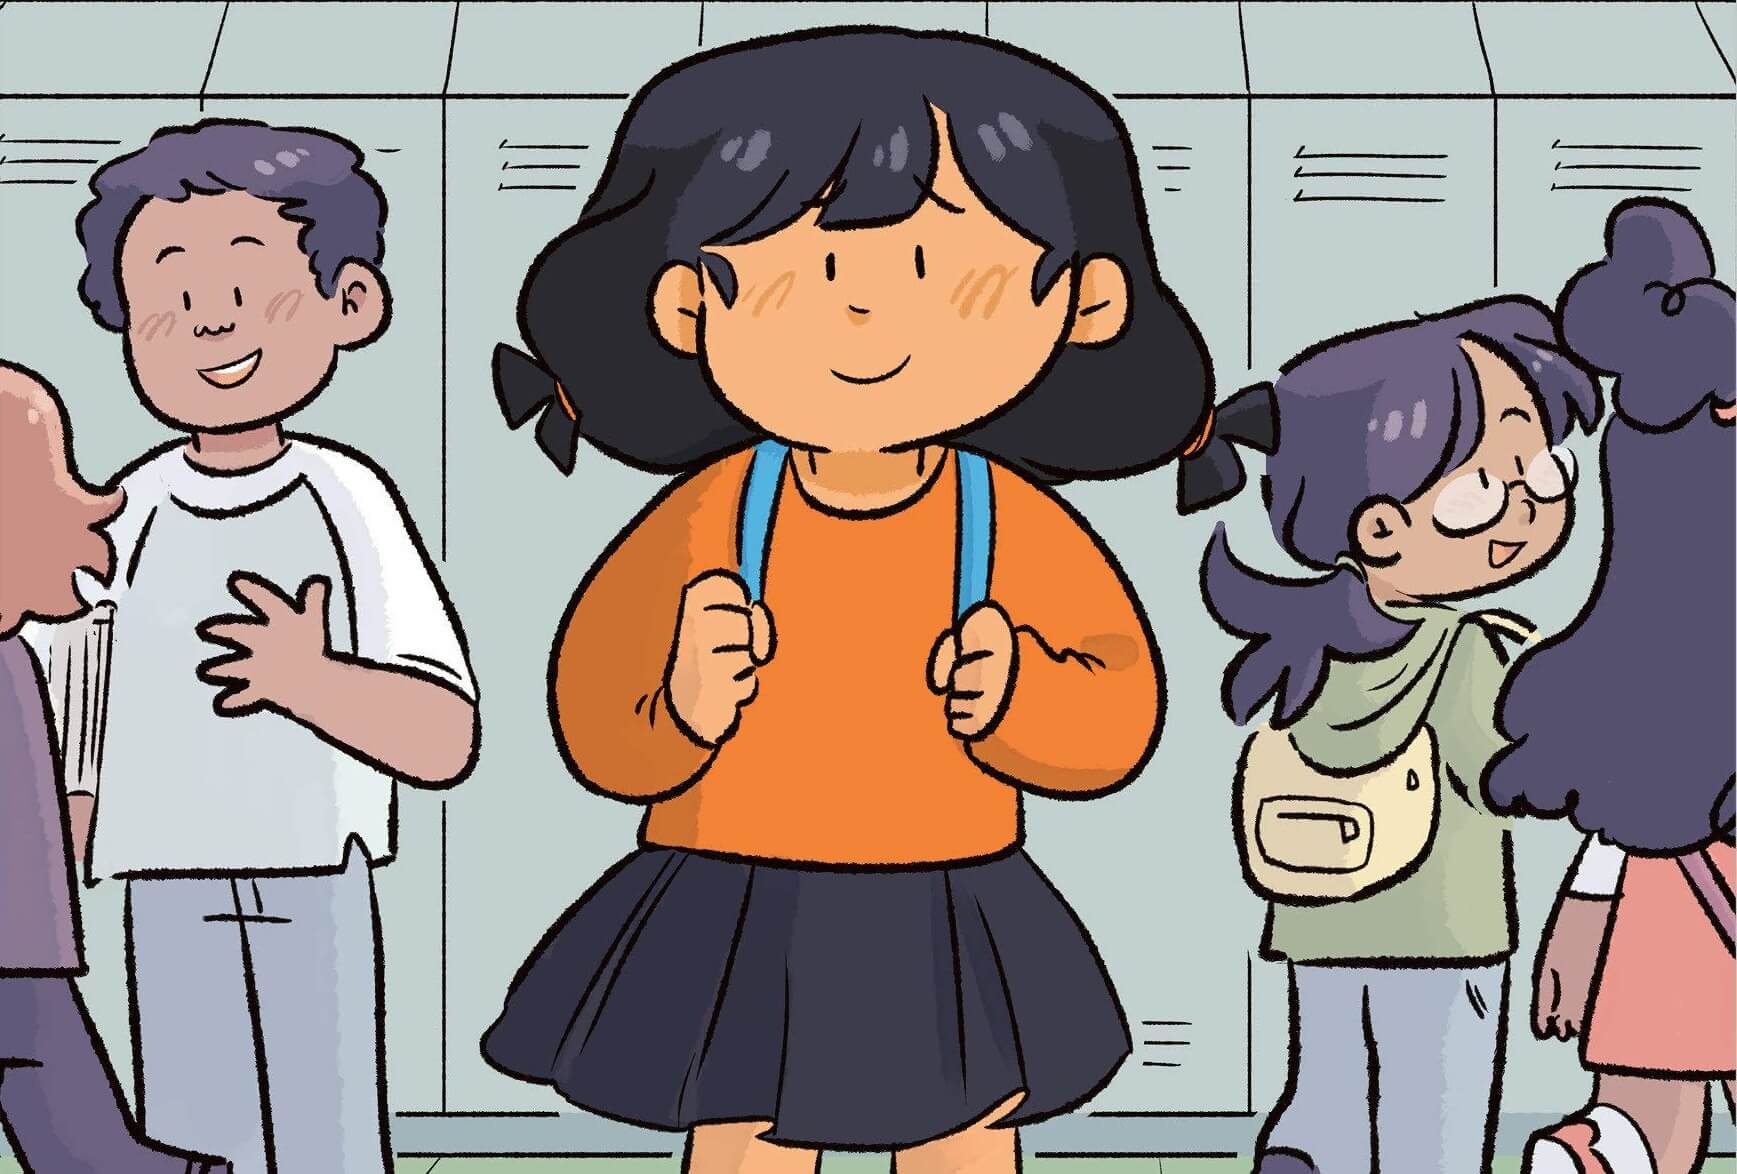 A young girl in a black skirt and orange top with light brown skin and black poufy pigtails walks towards the camera. She is wearing a slight smile and she is holding on to the straps of her backpack. Behind her are other children standing in front of lockers talking